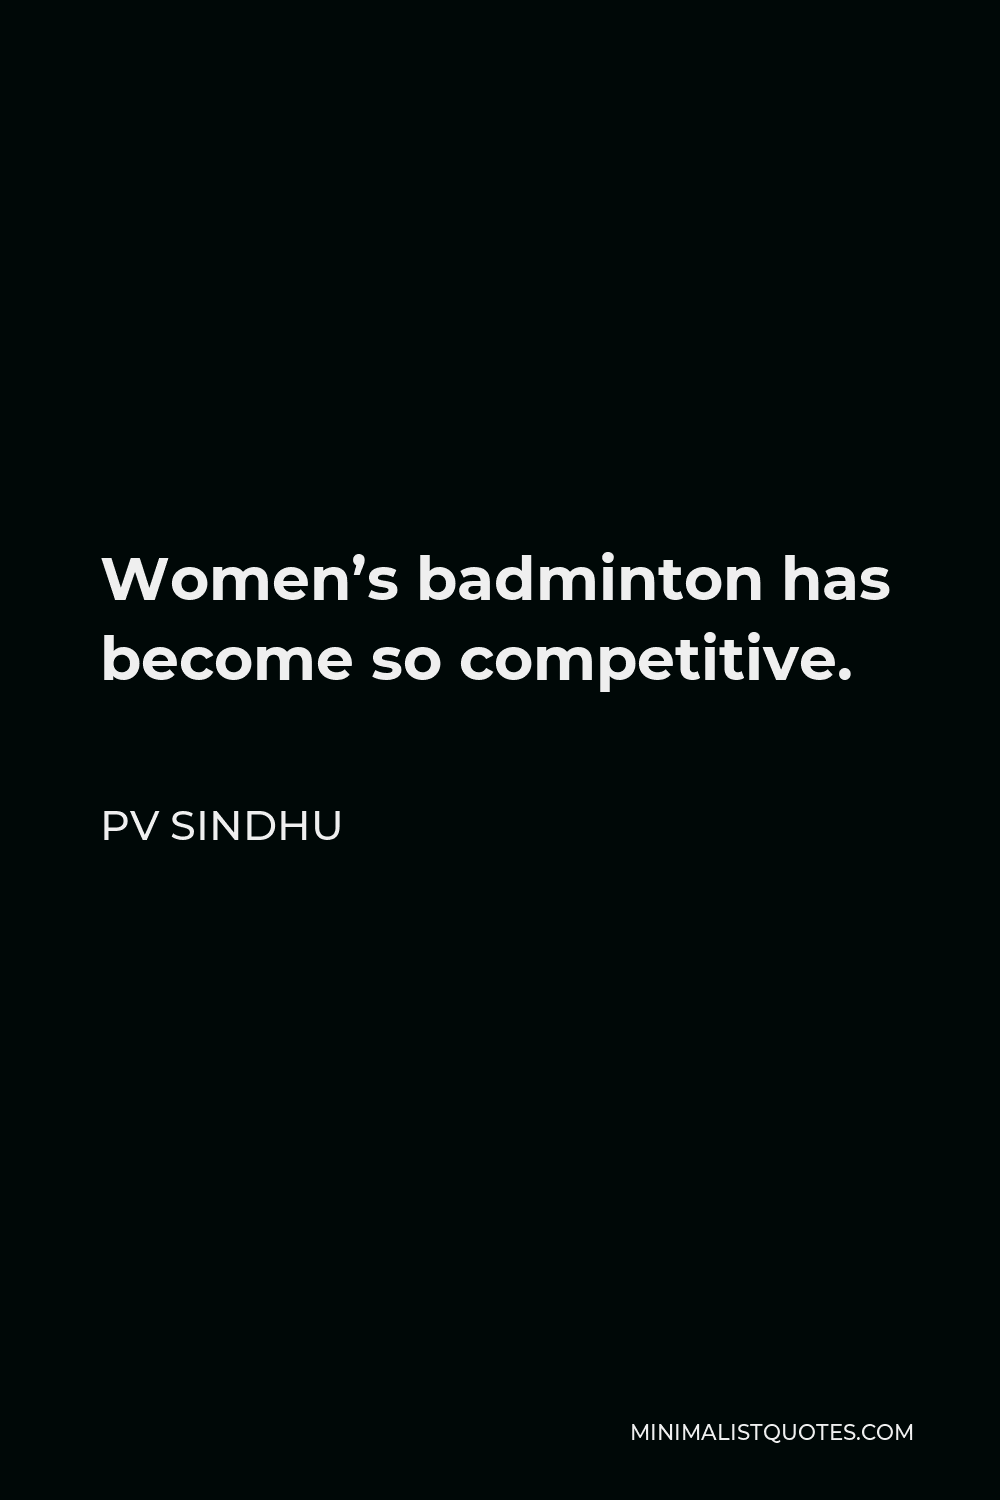 PV Sindhu Quote: I dont fear anyone. I just concentrate 